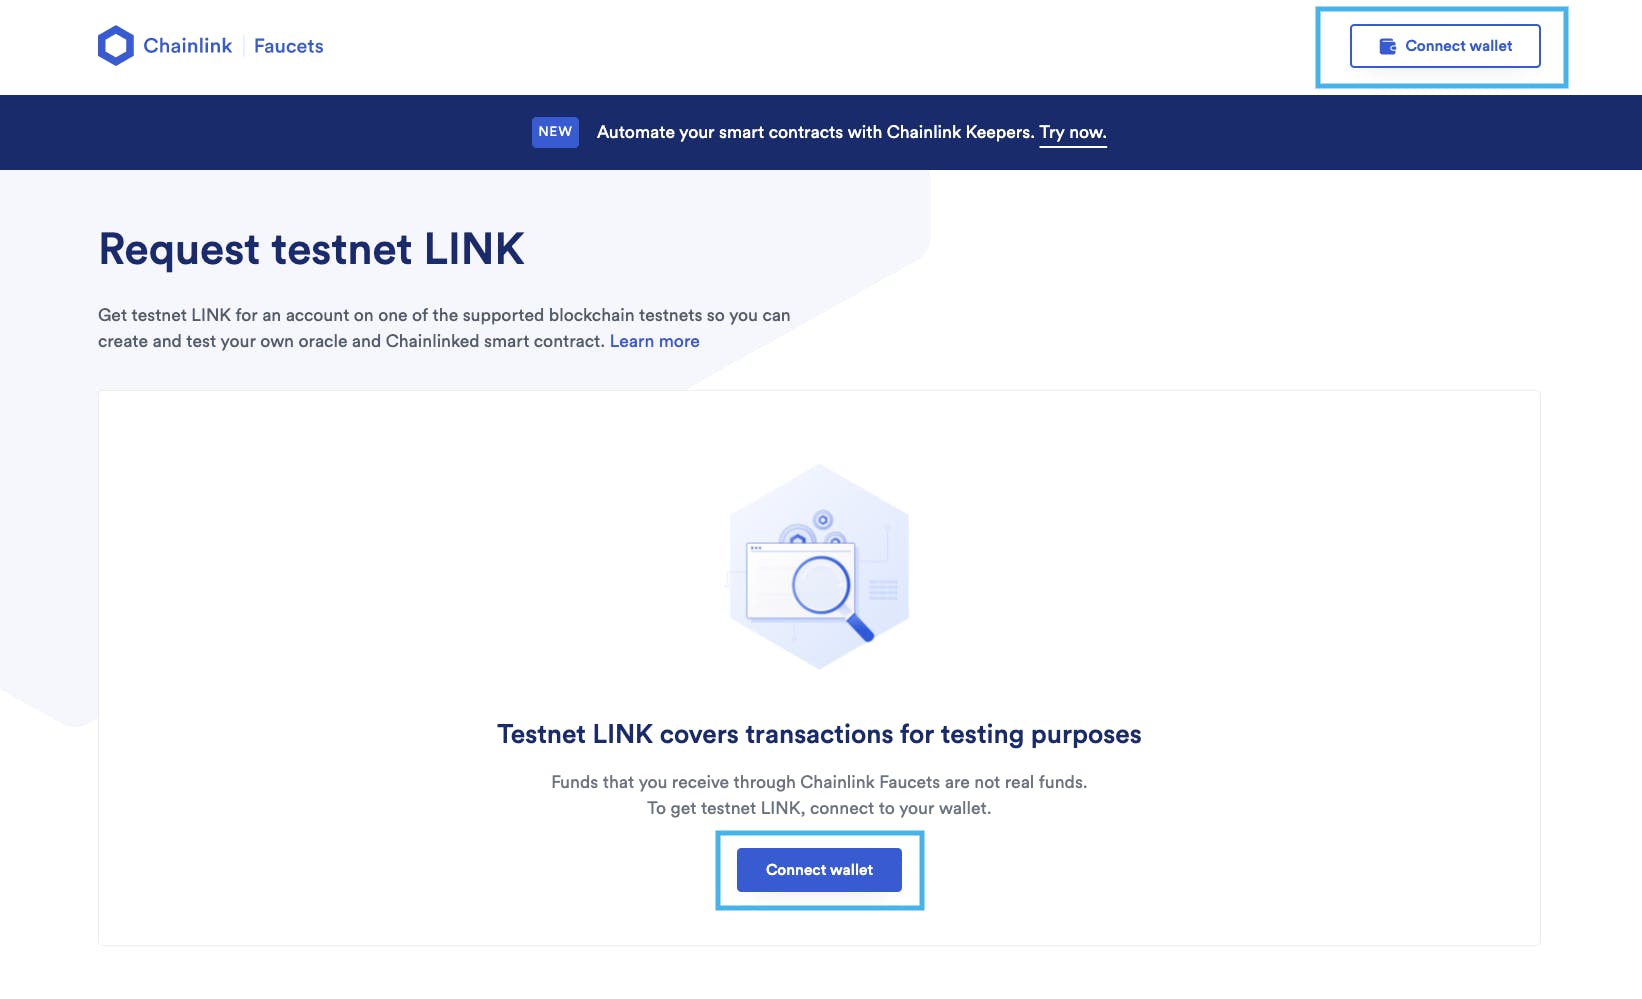 In order to get a free Testnet token from the Chainlink faucet, you need to connect your wallet address